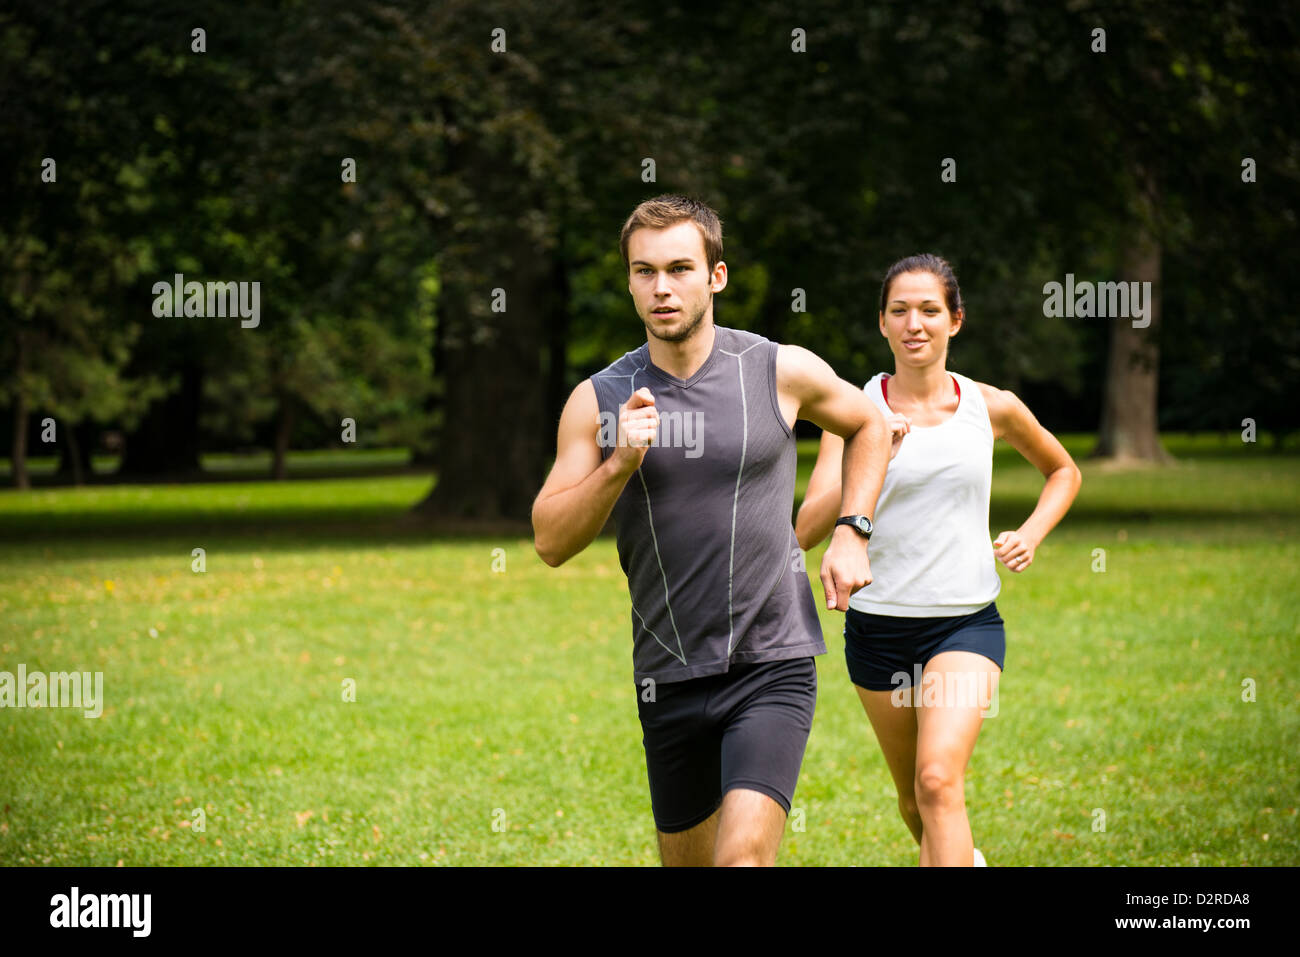 Young fitness couple jogging outdoor, man first Stock Photo